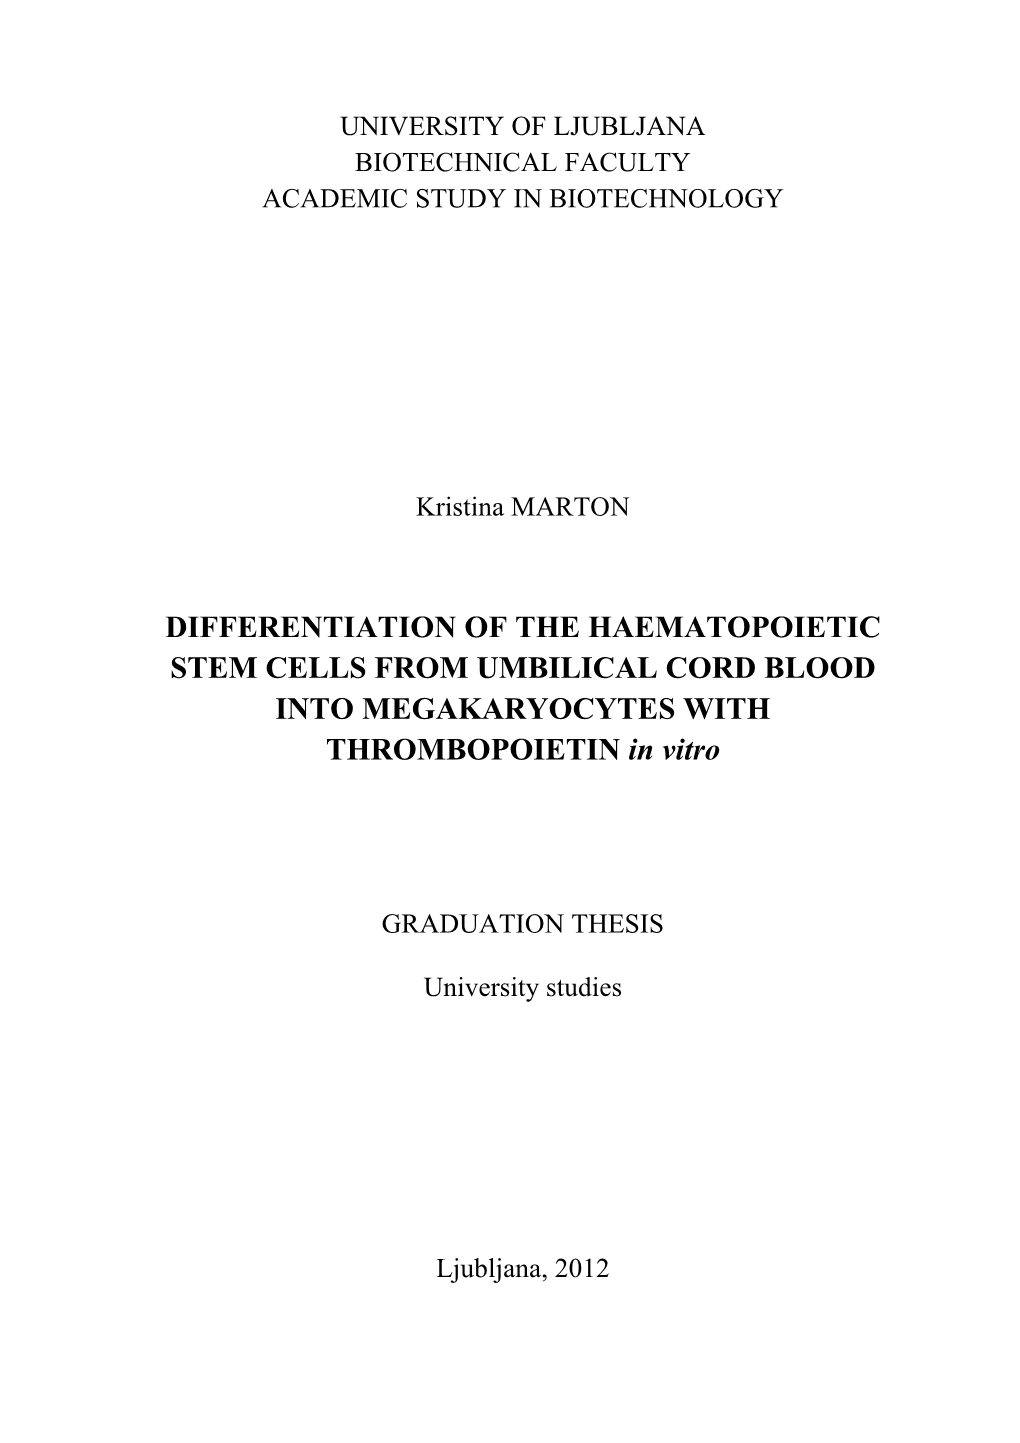 DIFFERENTIATION of the HAEMATOPOIETIC STEM CELLS from UMBILICAL CORD BLOOD INTO MEGAKARYOCYTES with THROMBOPOIETIN in Vitro